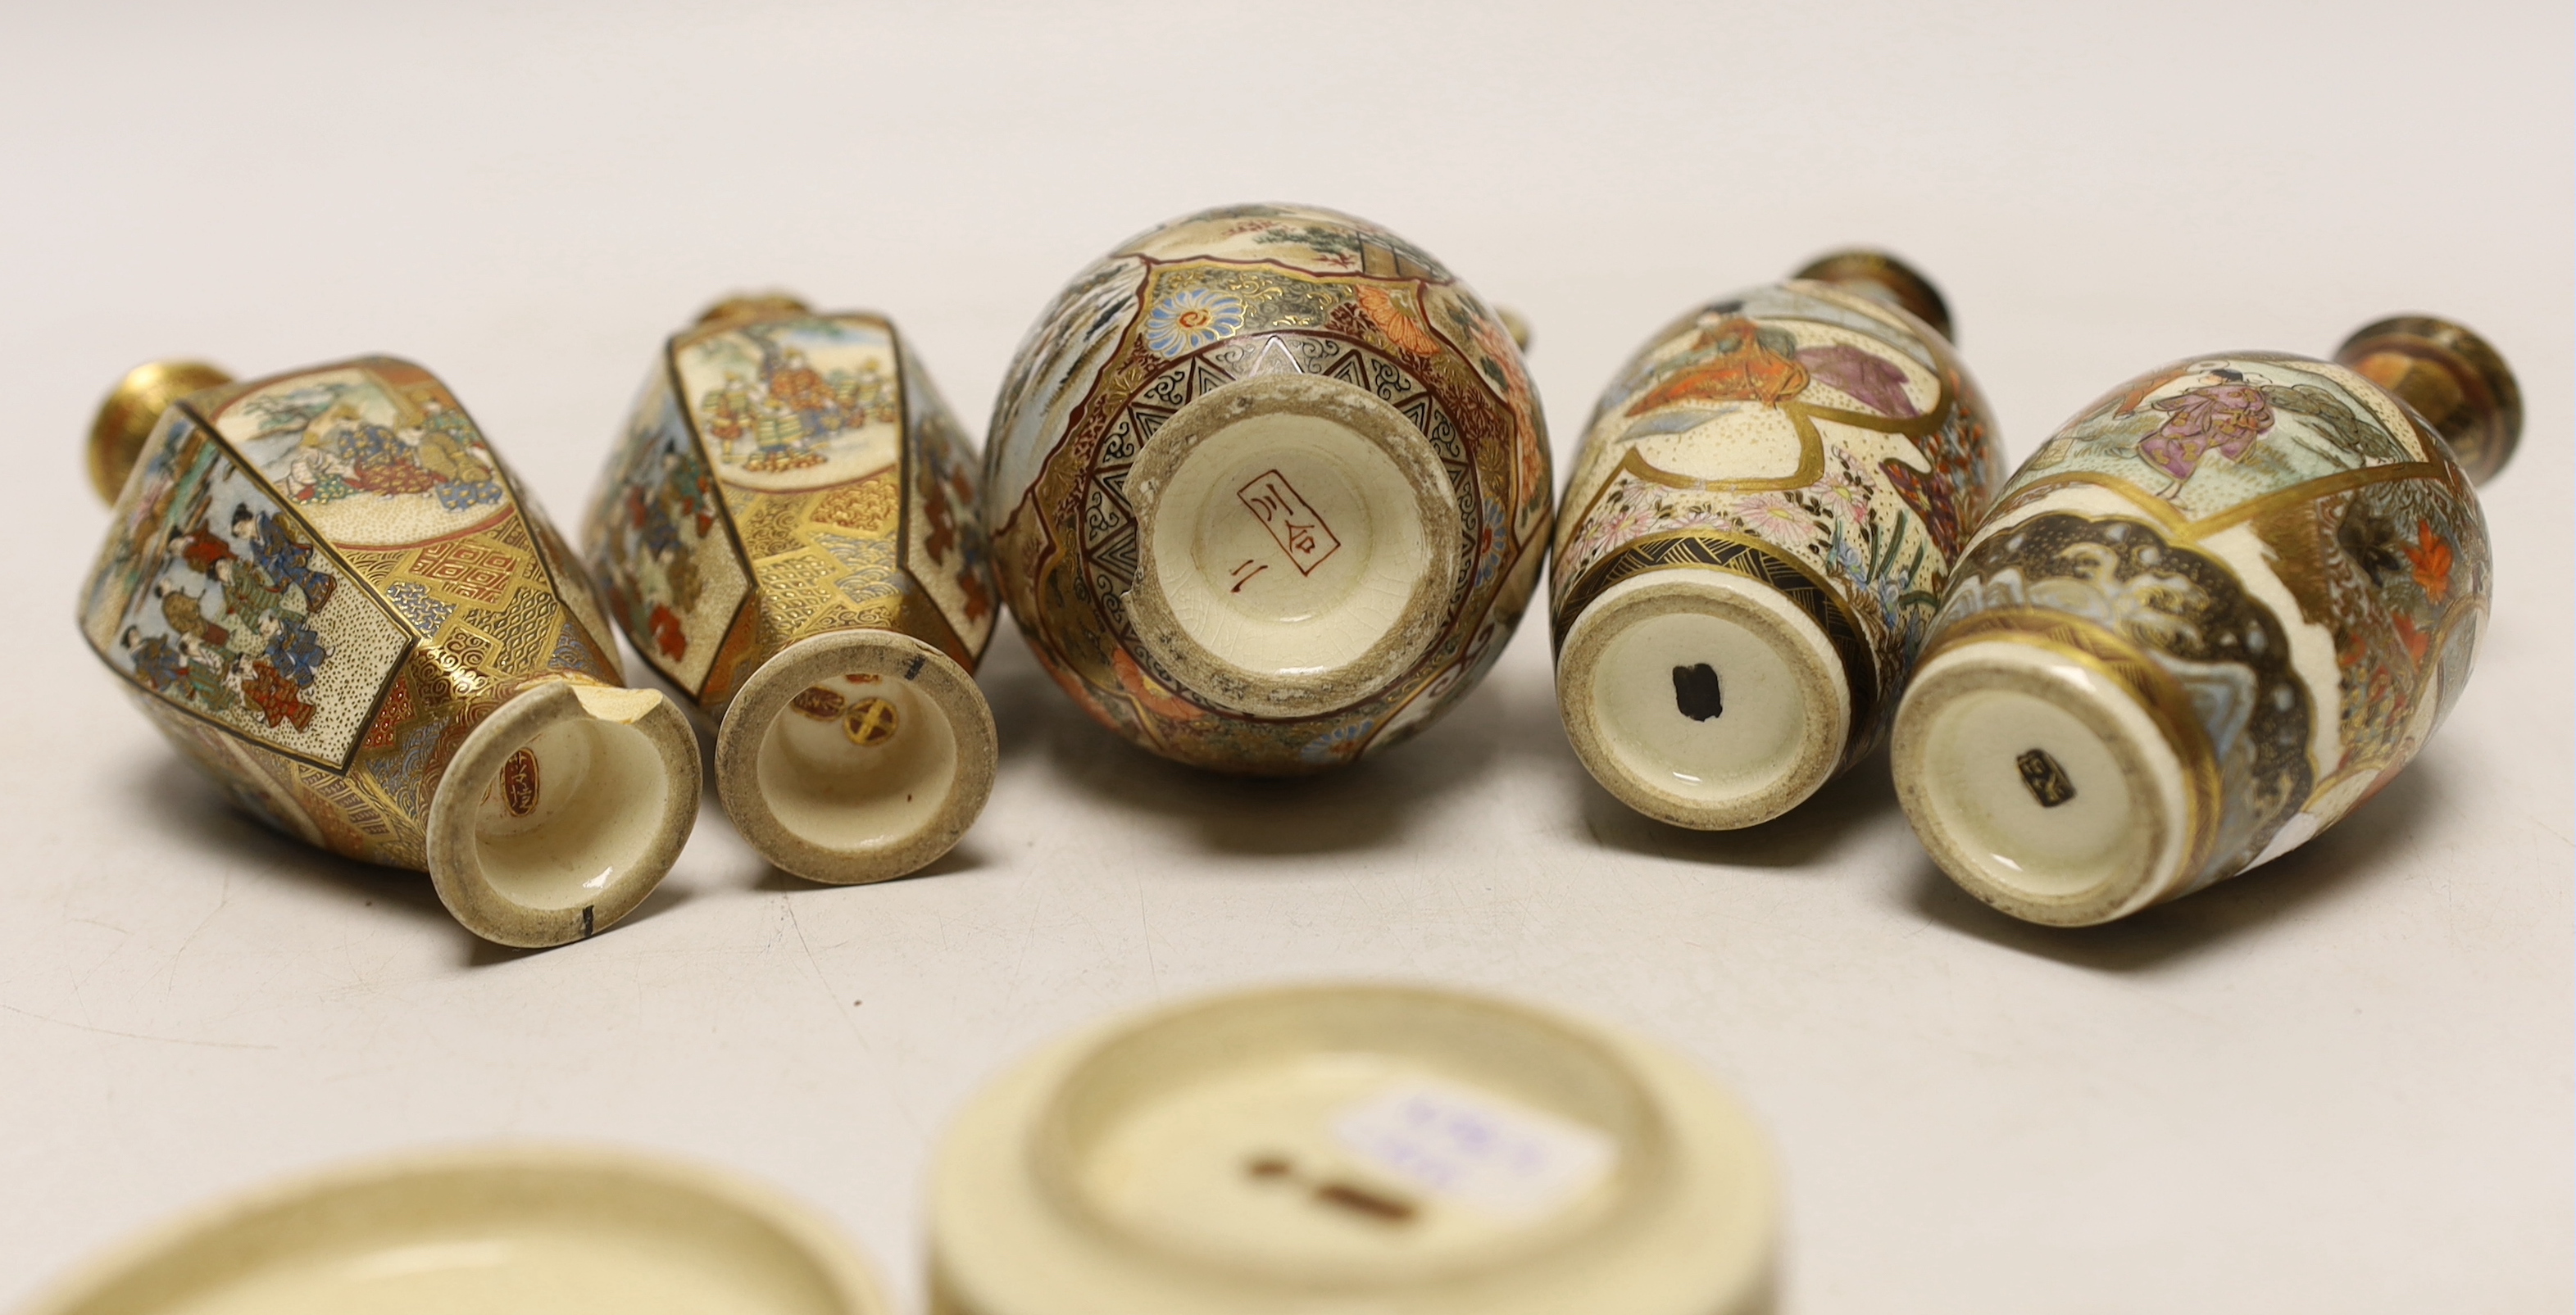 A collection of miniature Japanese satsuma, Meiji vases and a box and cover, box and cover 6cm diameter